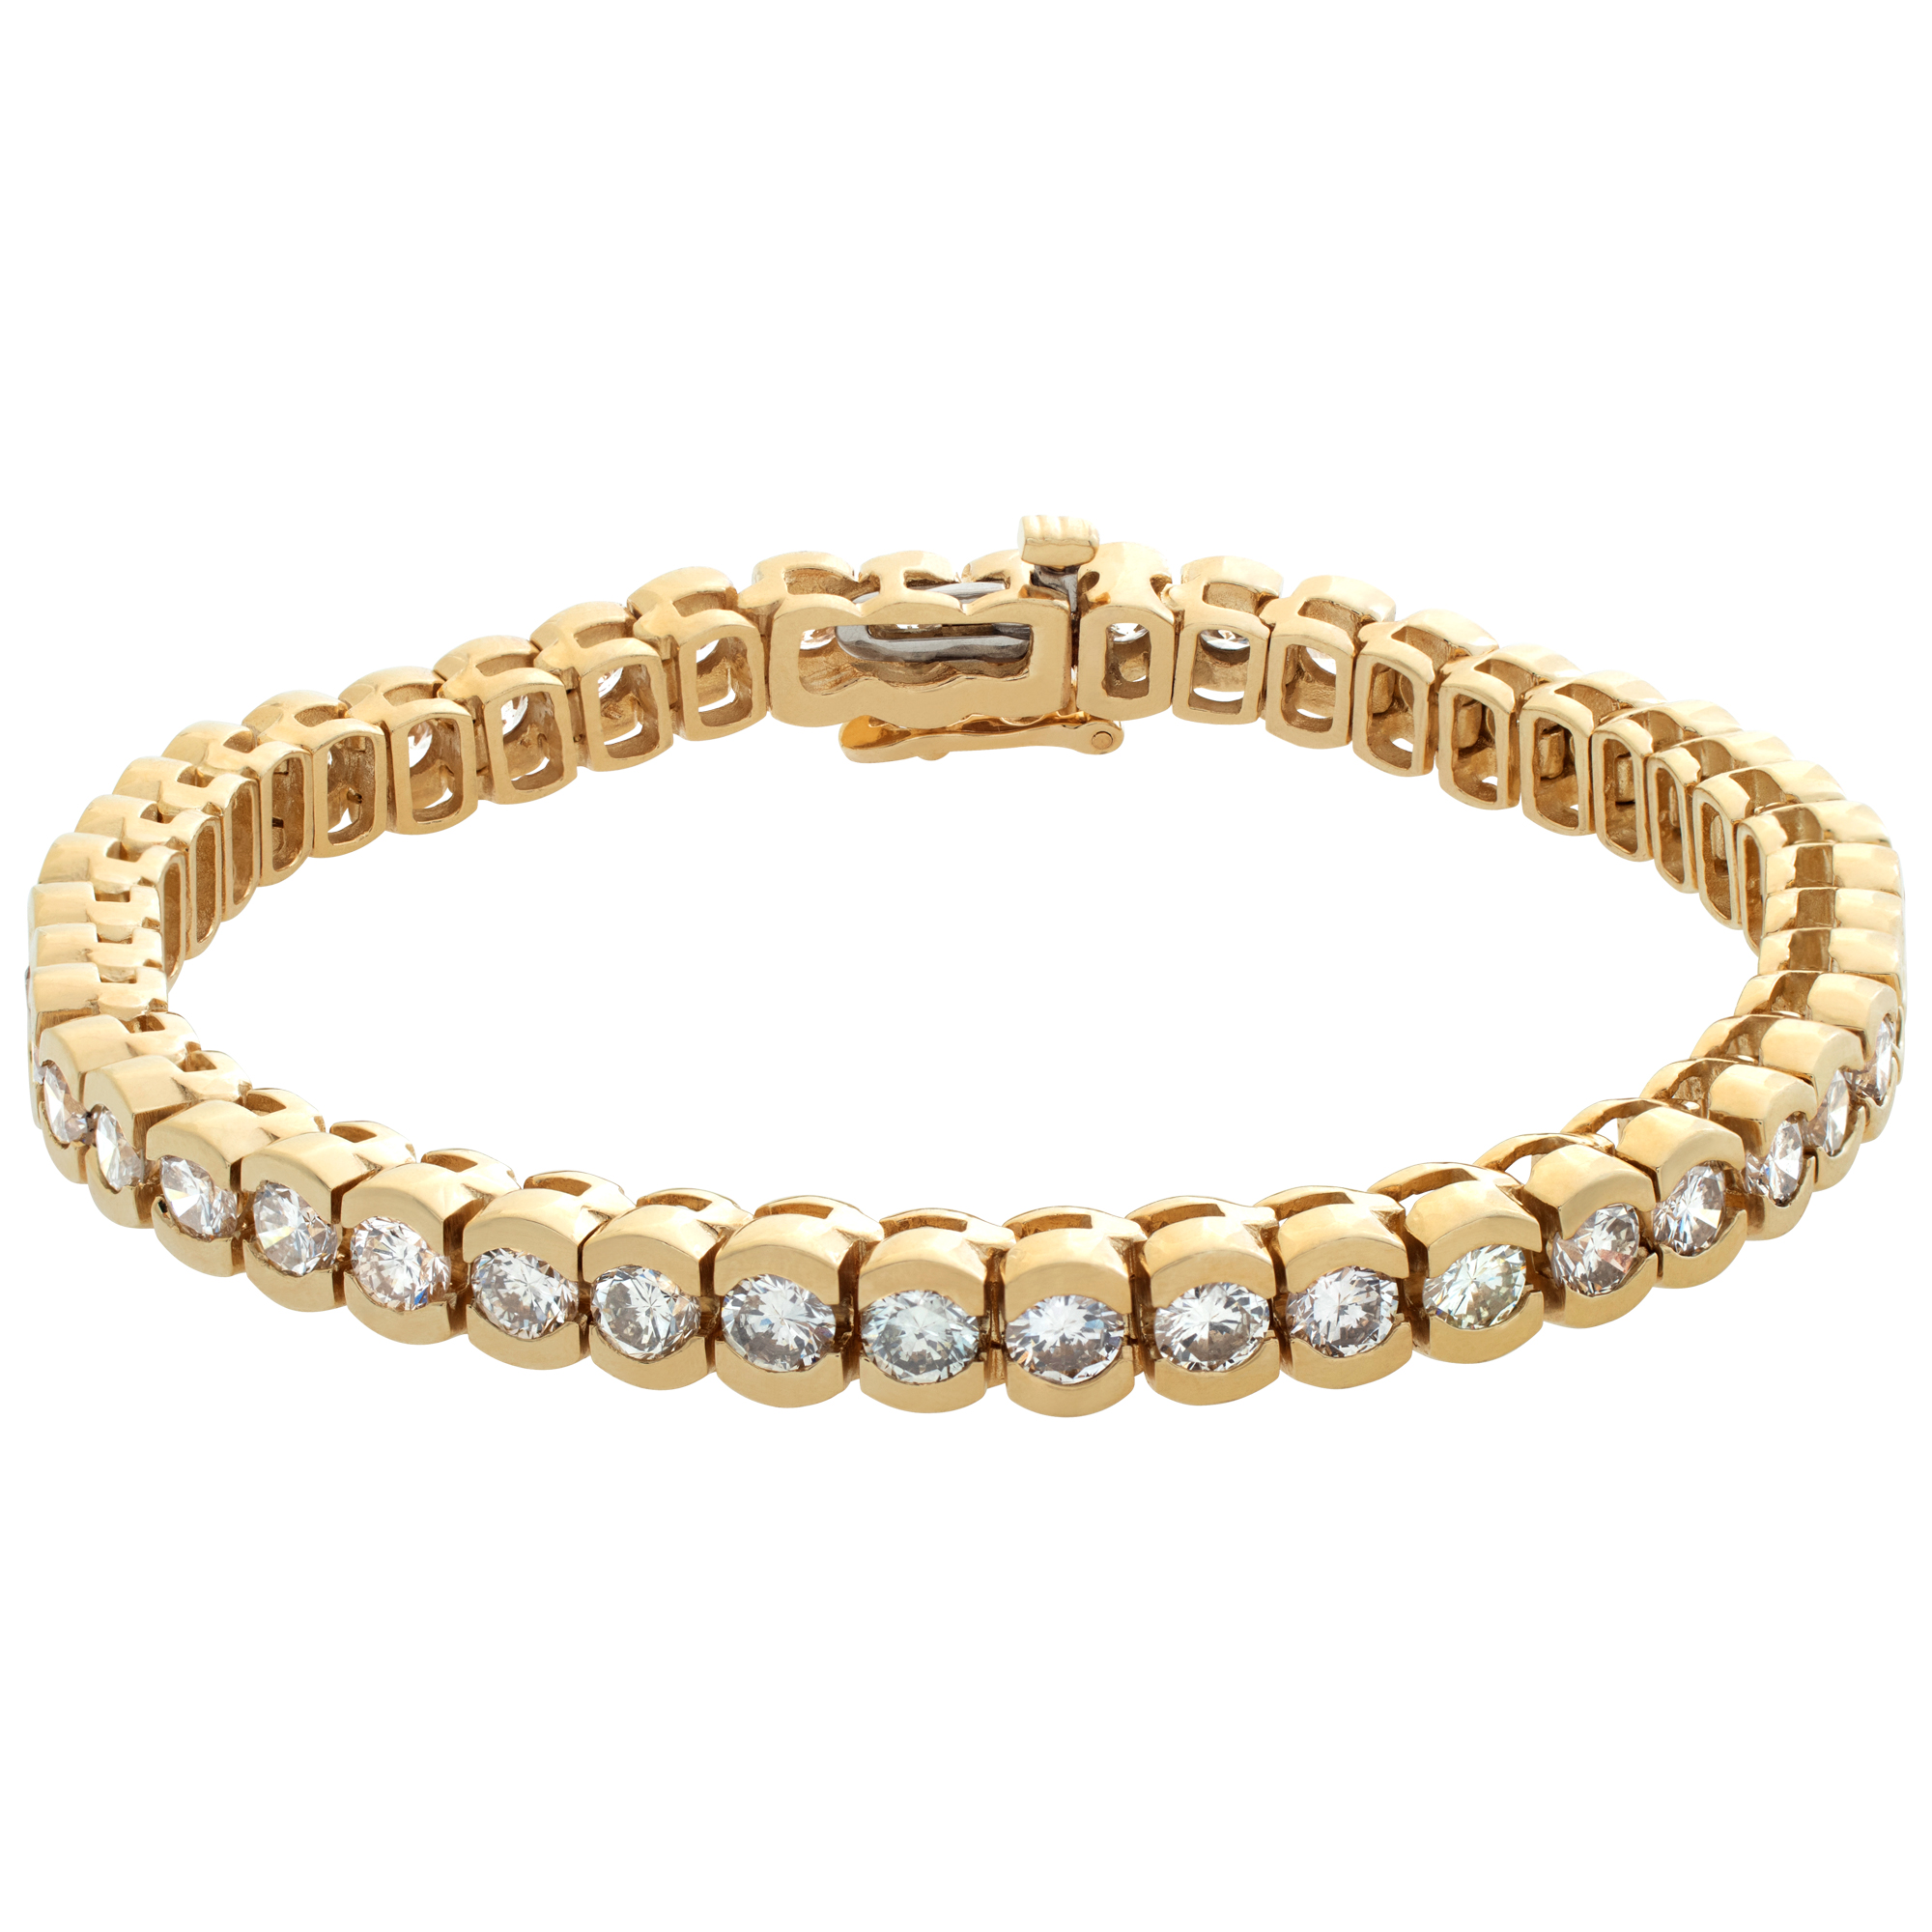 Diamond line bracelet in 14k yellow gold with over 7 carats in round diamonds